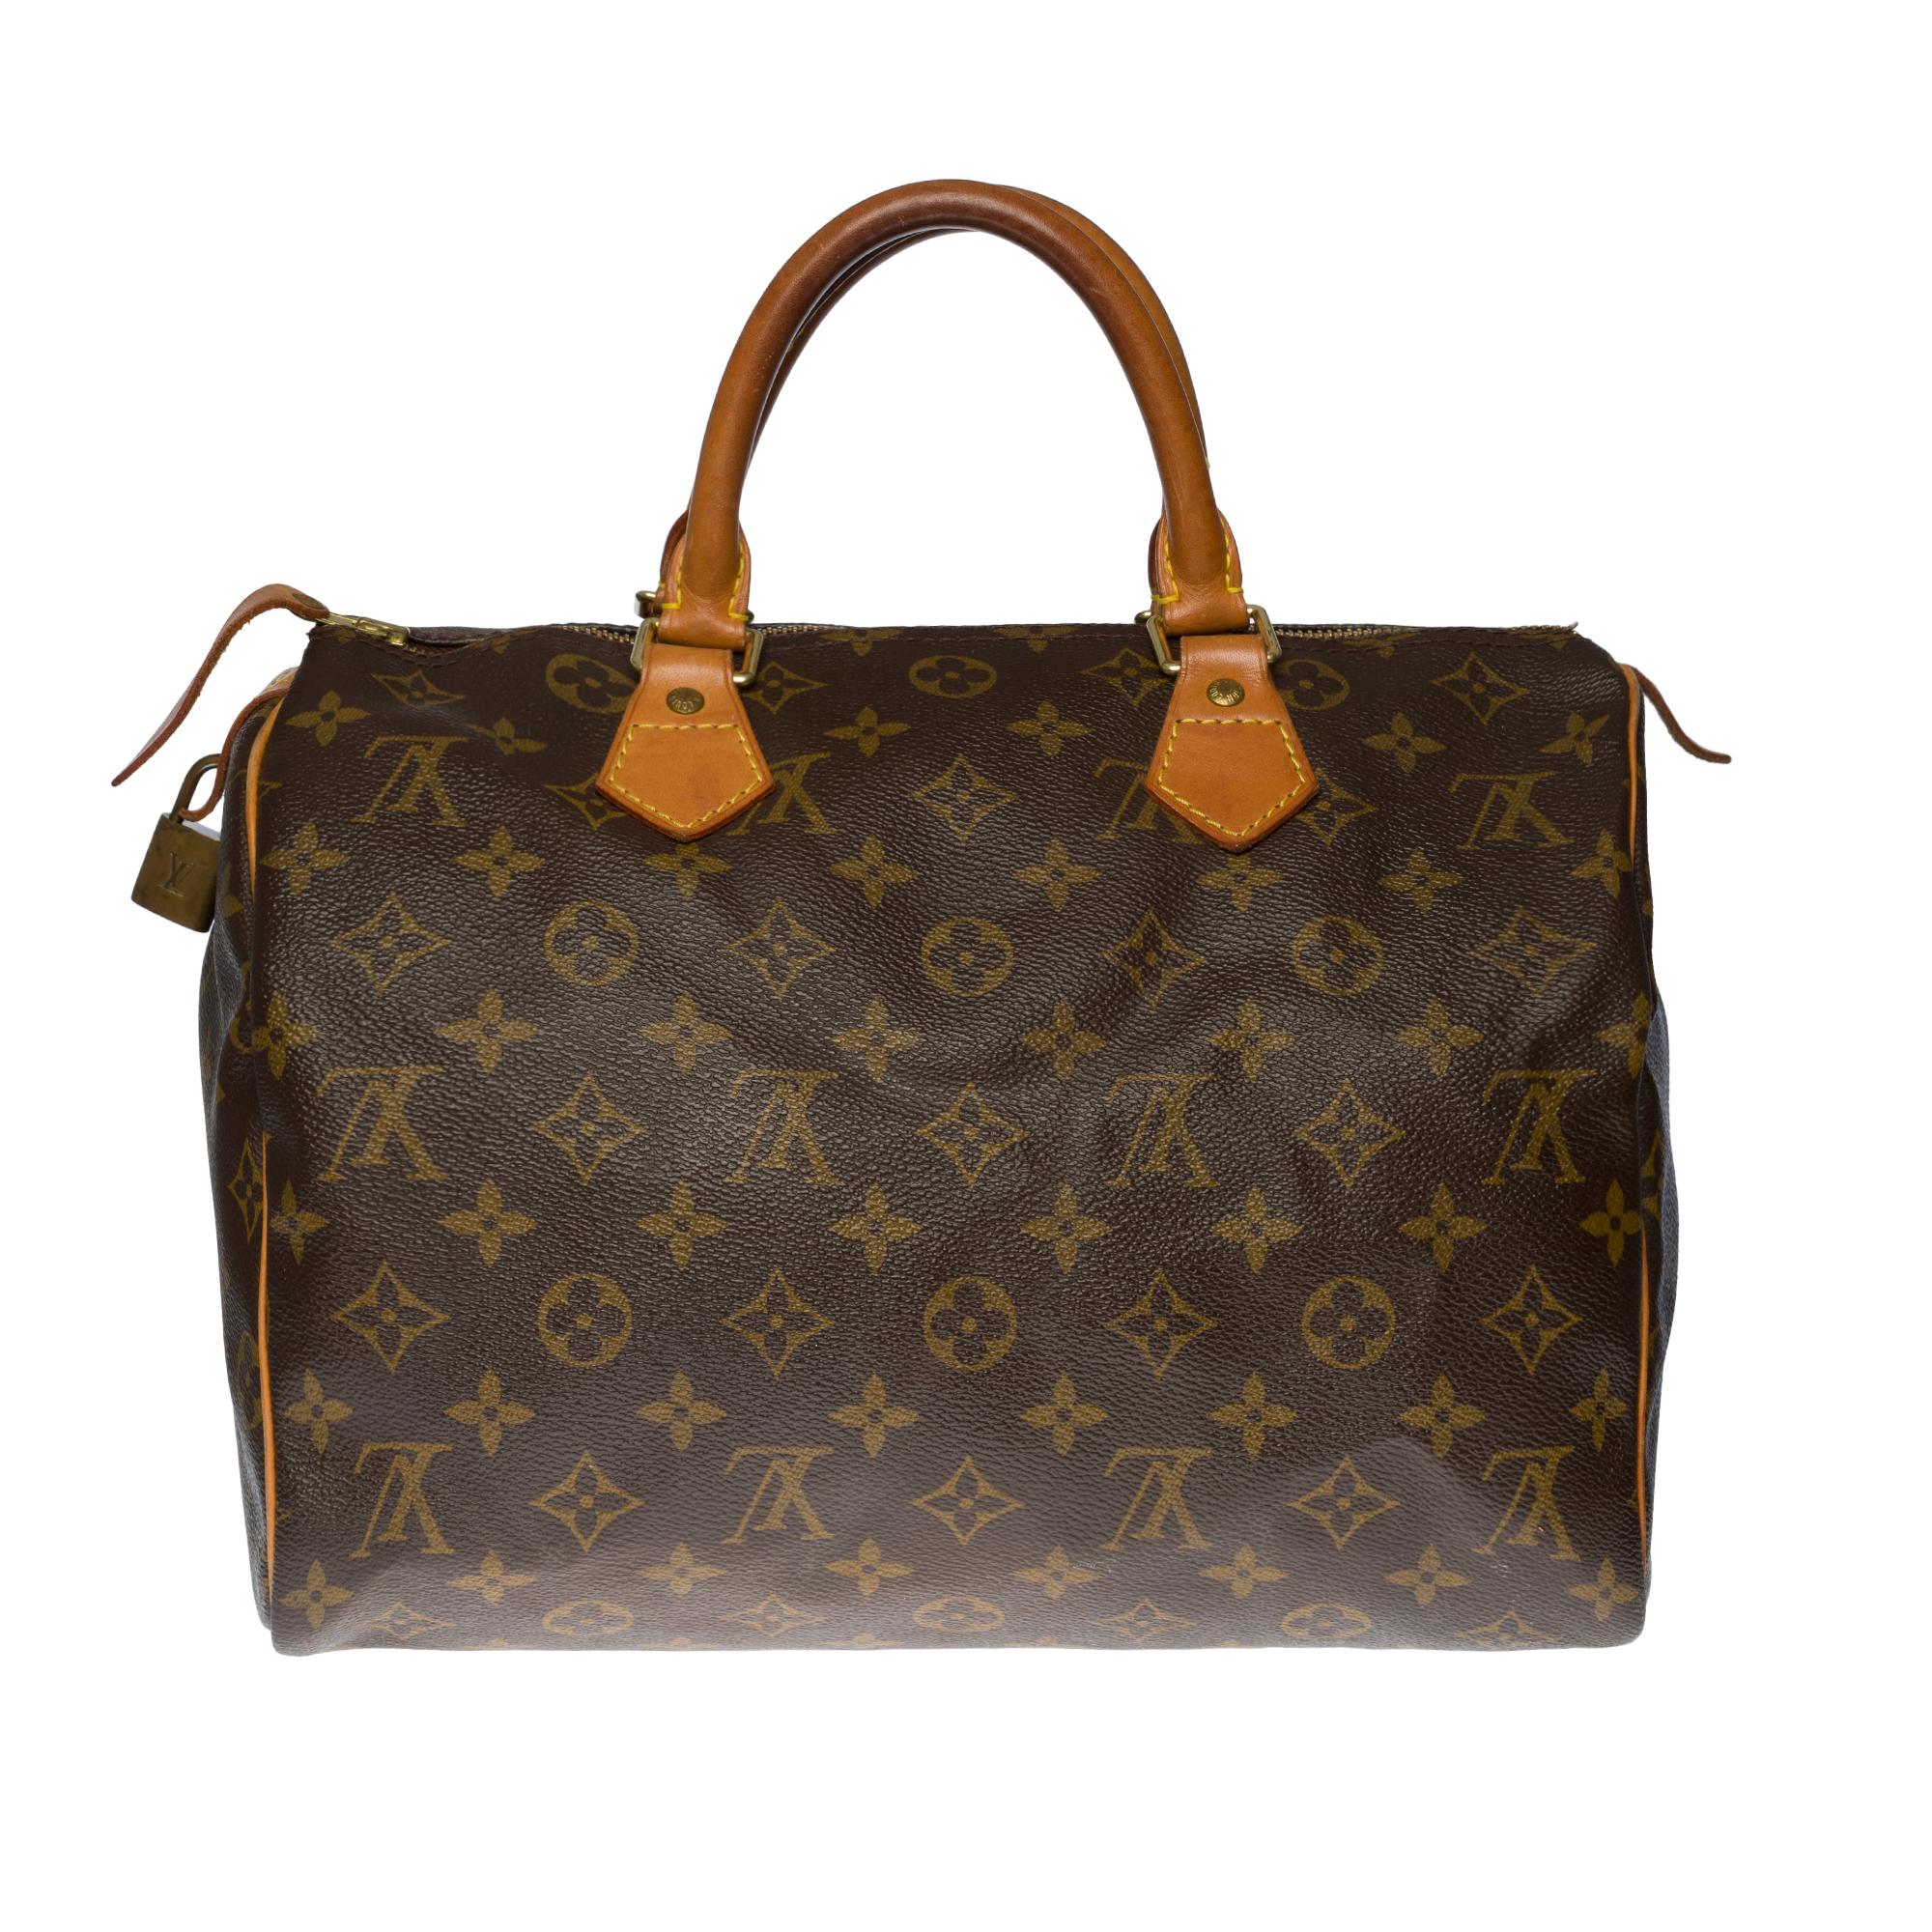 Beautiful Louis Vuitton Speedy 30 handbag in brown Monogram canvas
Gold-tone metal hardware, double leather handle for carrying. Double zip closure
Brown canvas interior
Signature: 